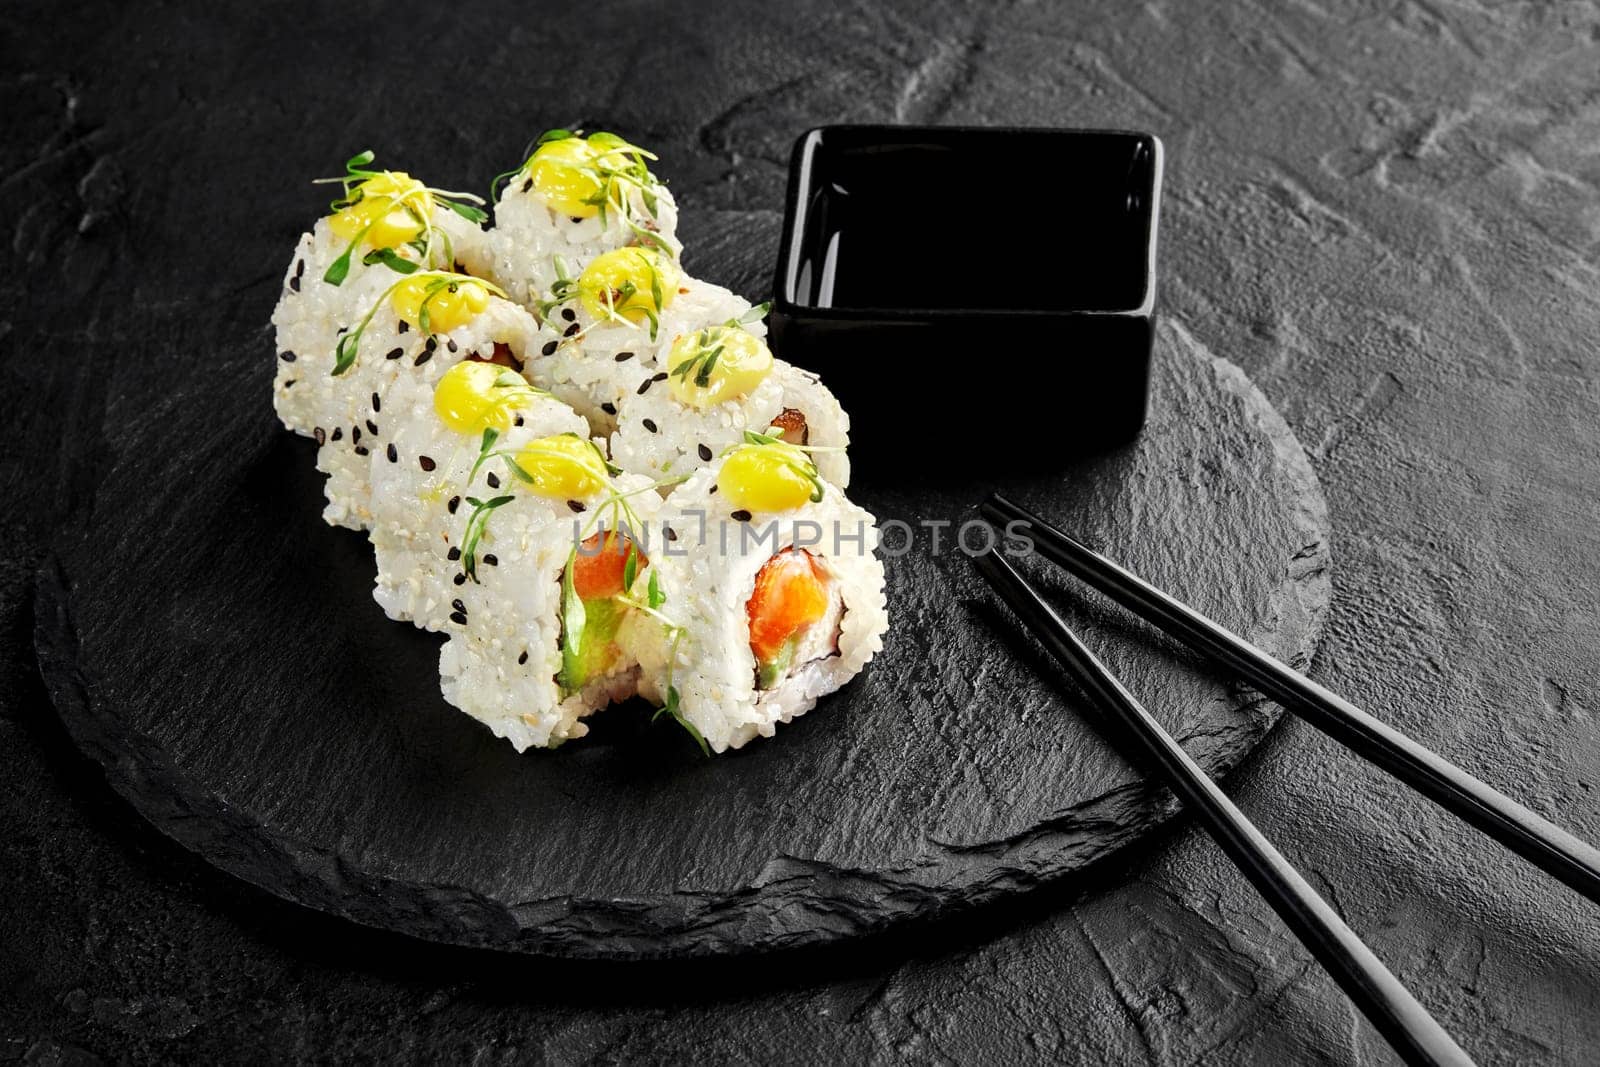 Salmon sushi rolls with avocado topped with mayo and microgreens by nazarovsergey